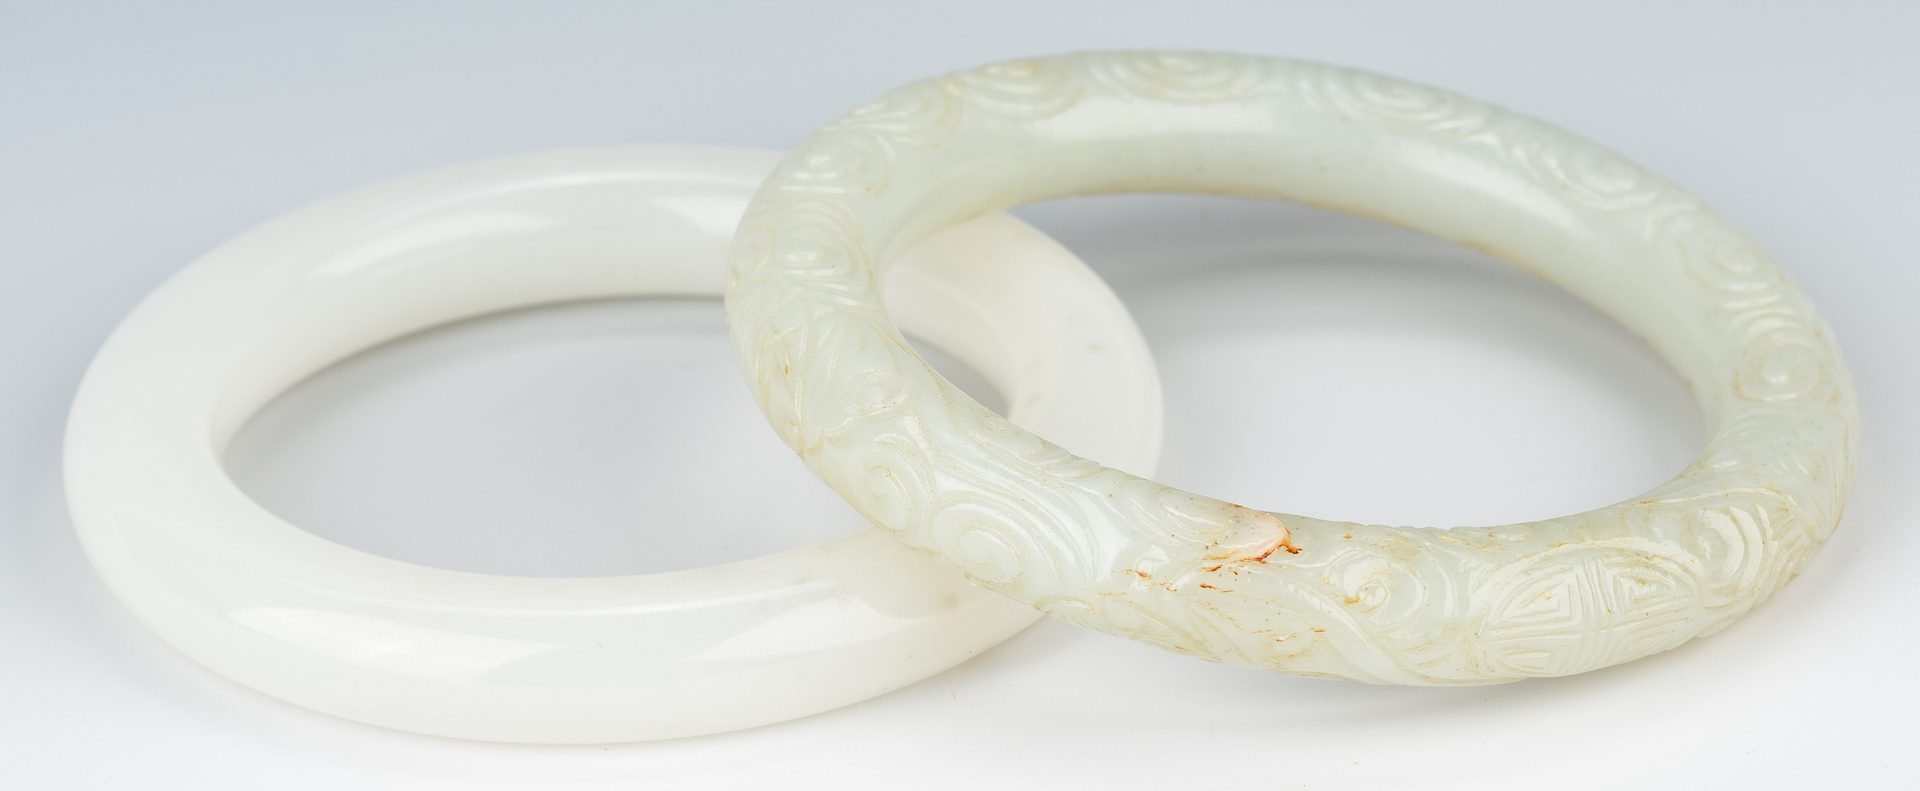 Lot 468: 2 Chinese Jade Bangles & 4 Jade Archer's Rings, 6 items